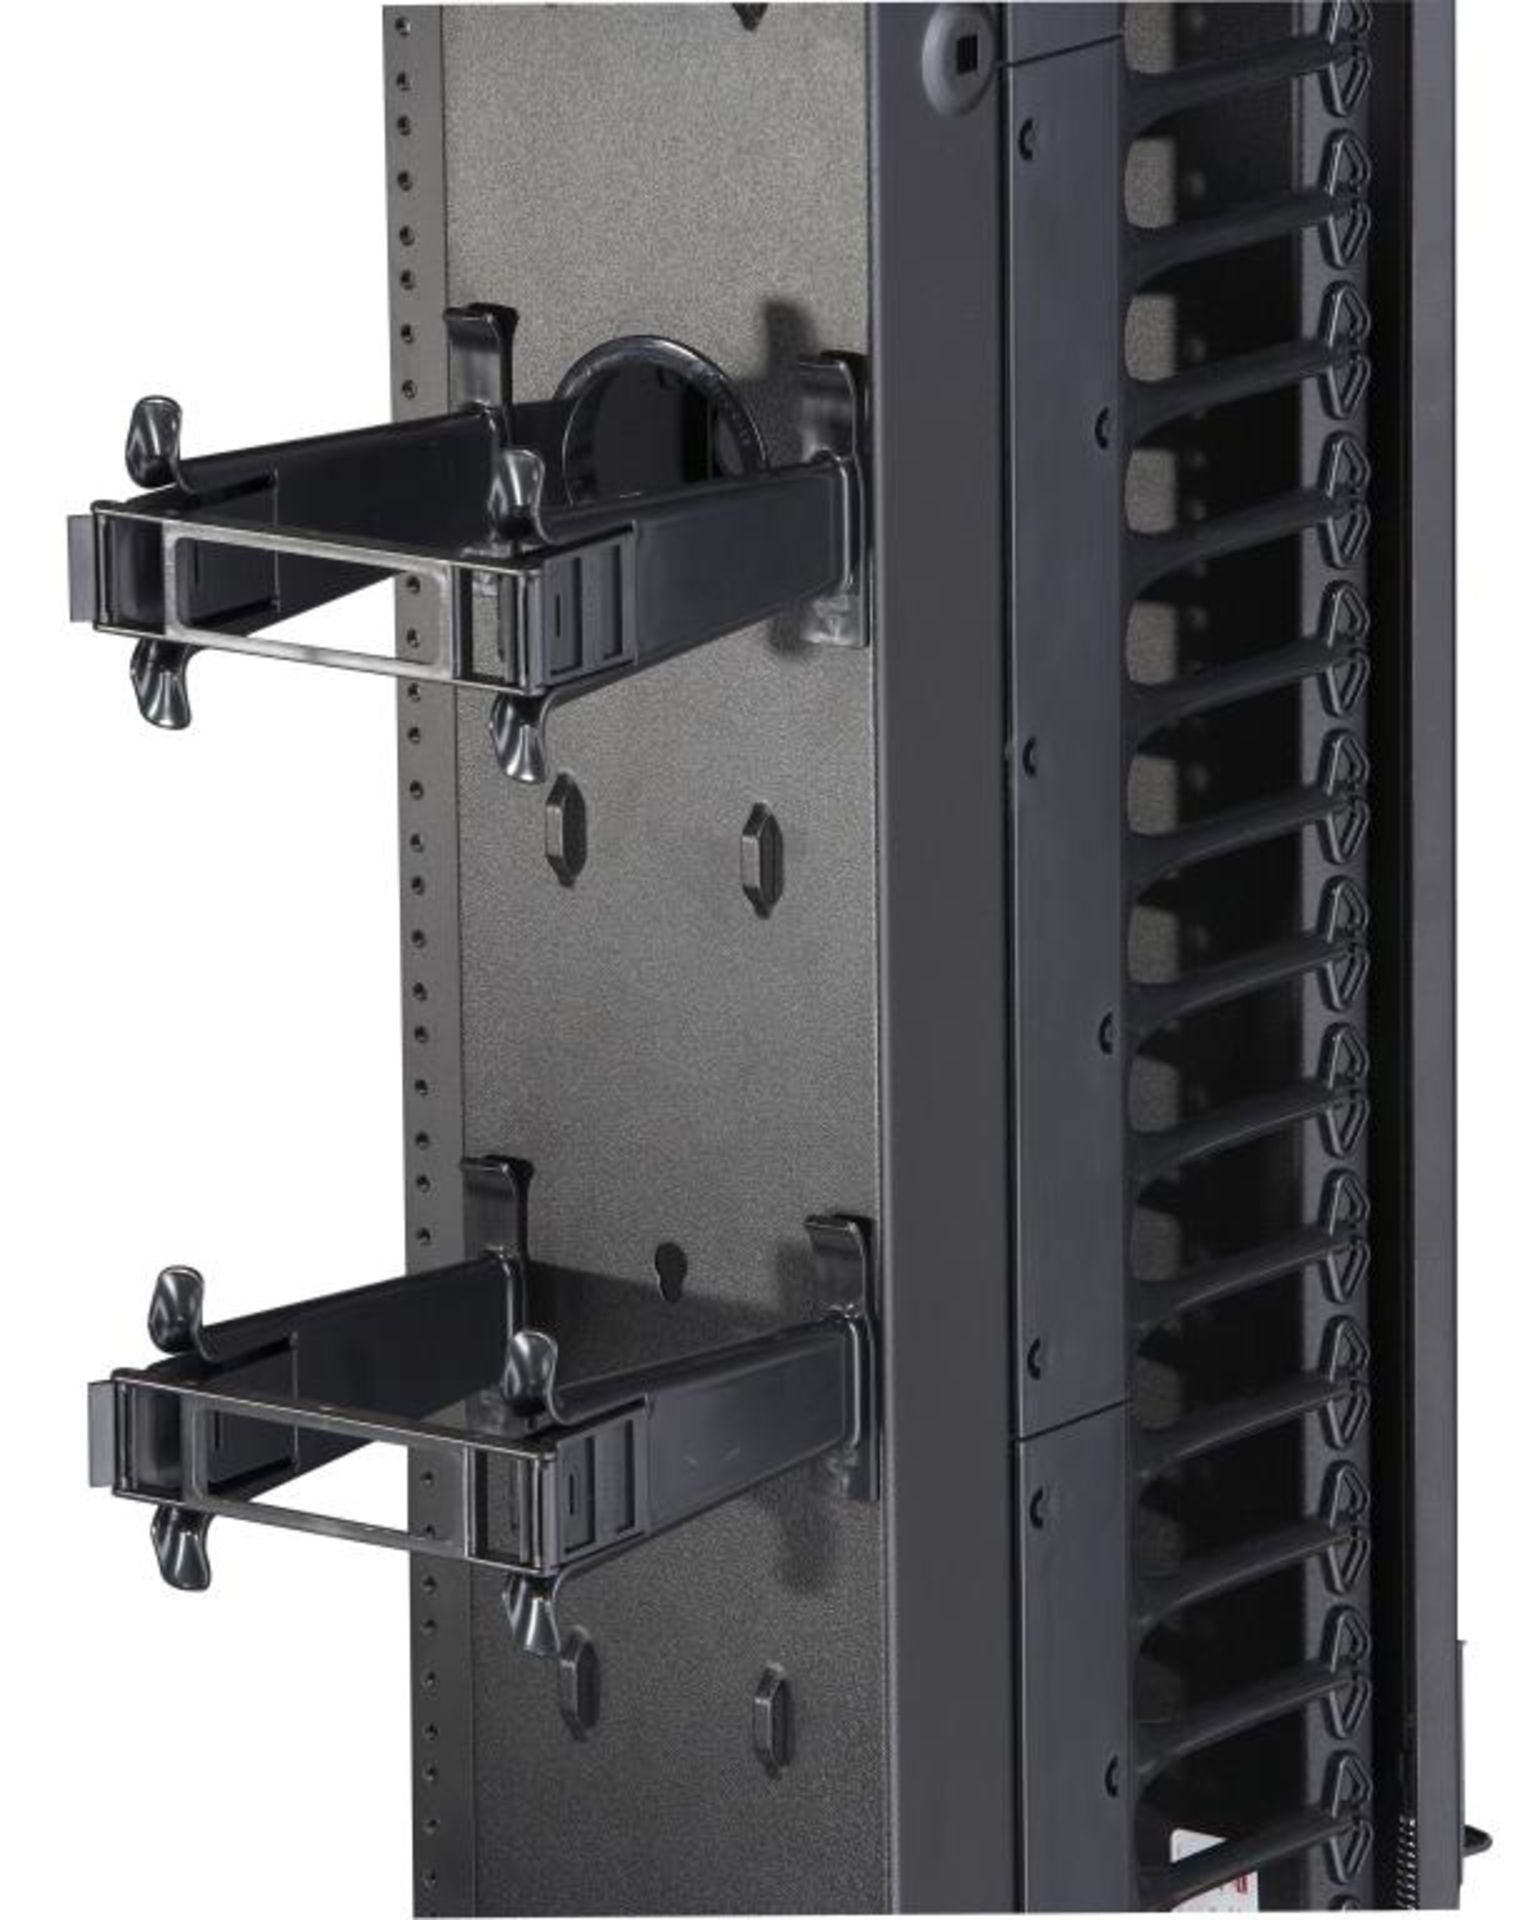 Server Cabinets and Component Parts - Image 18 of 19